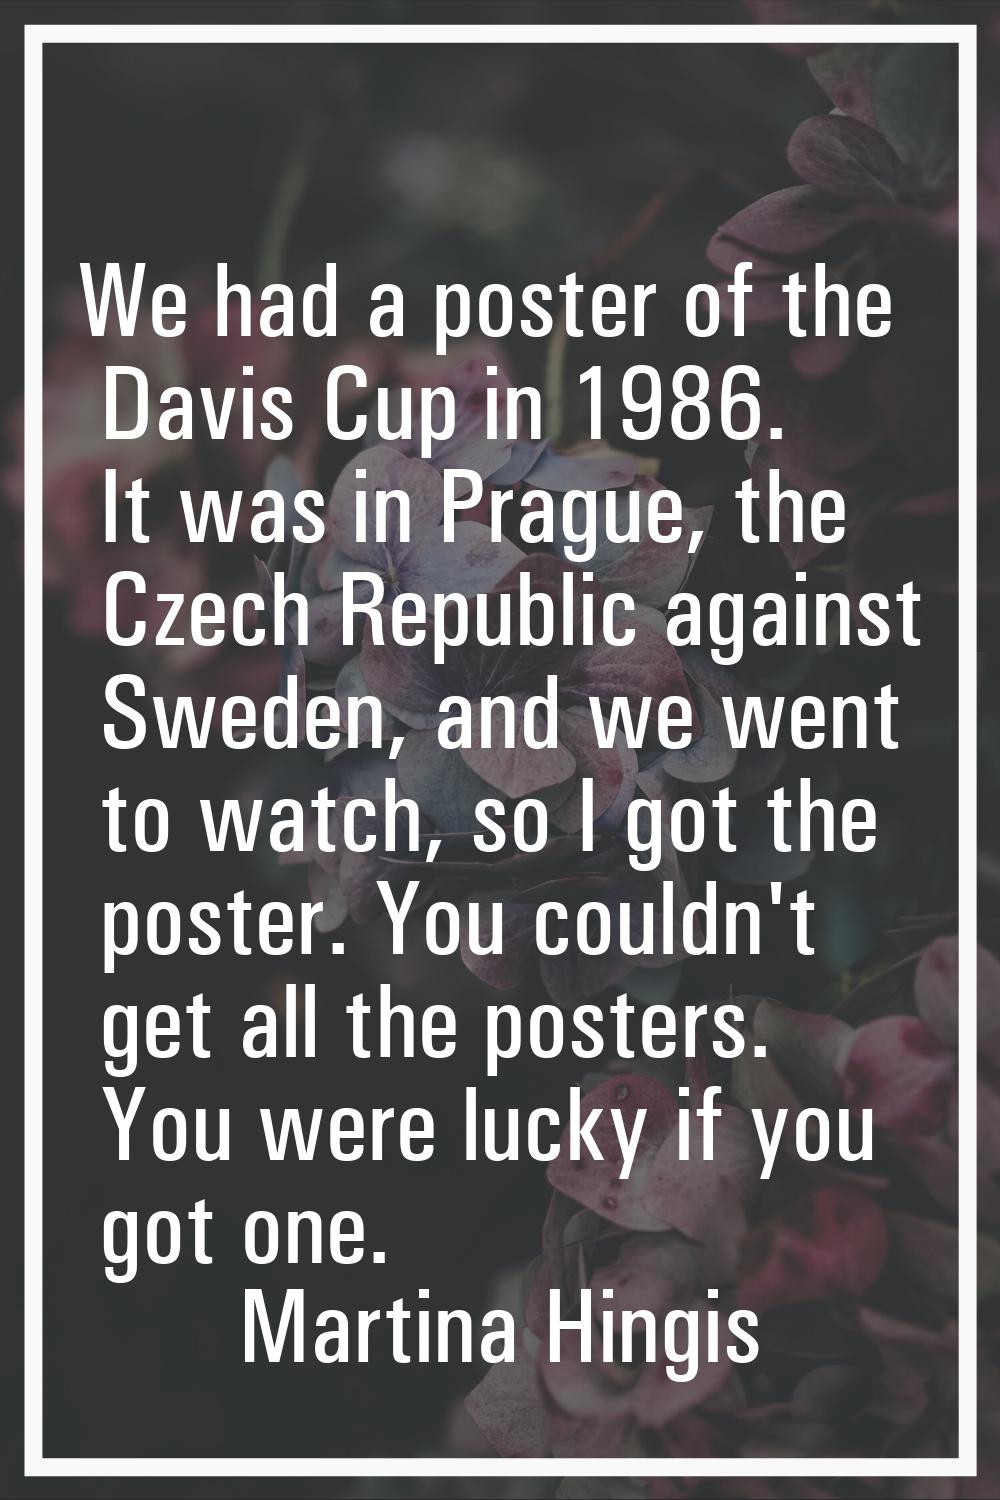 We had a poster of the Davis Cup in 1986. It was in Prague, the Czech Republic against Sweden, and 